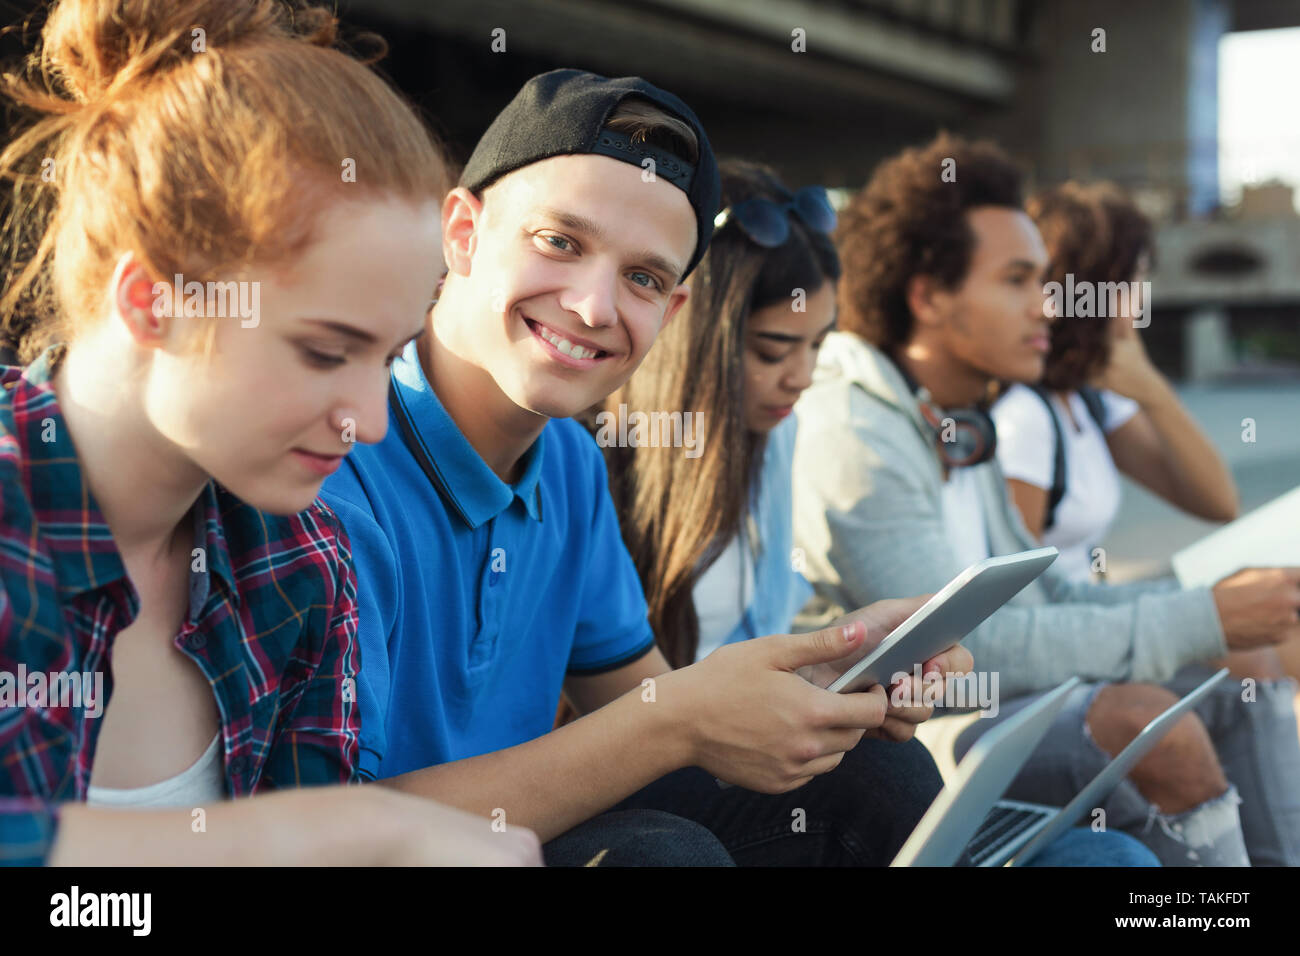 College students studying outdoor, preparing for exams Stock Photo